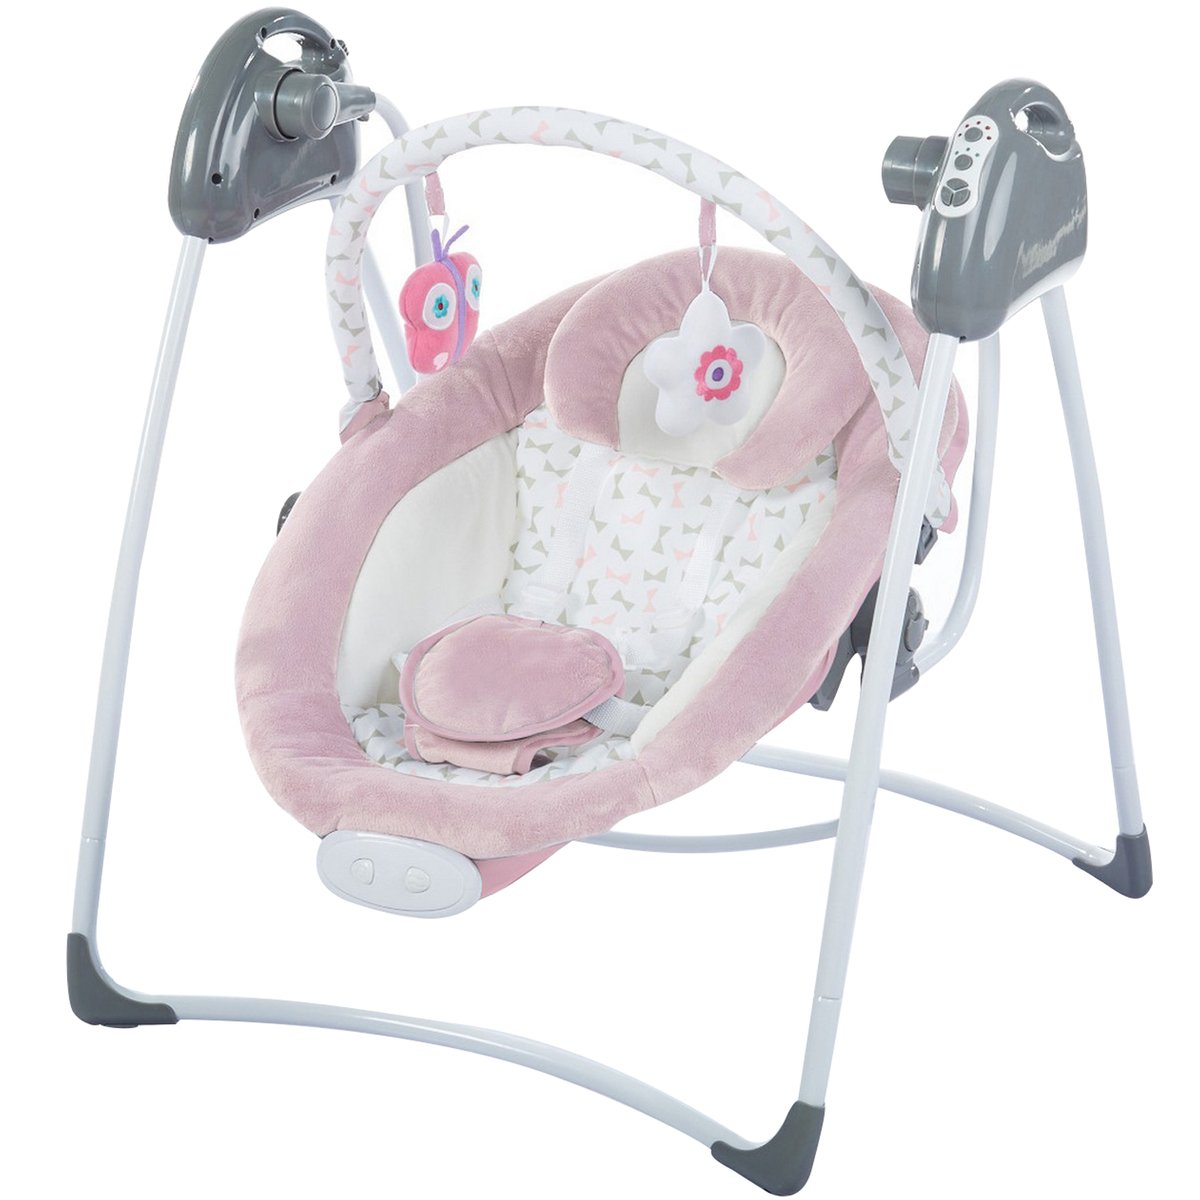 First Step Baby Swing Bed SW-108 Assorted Color